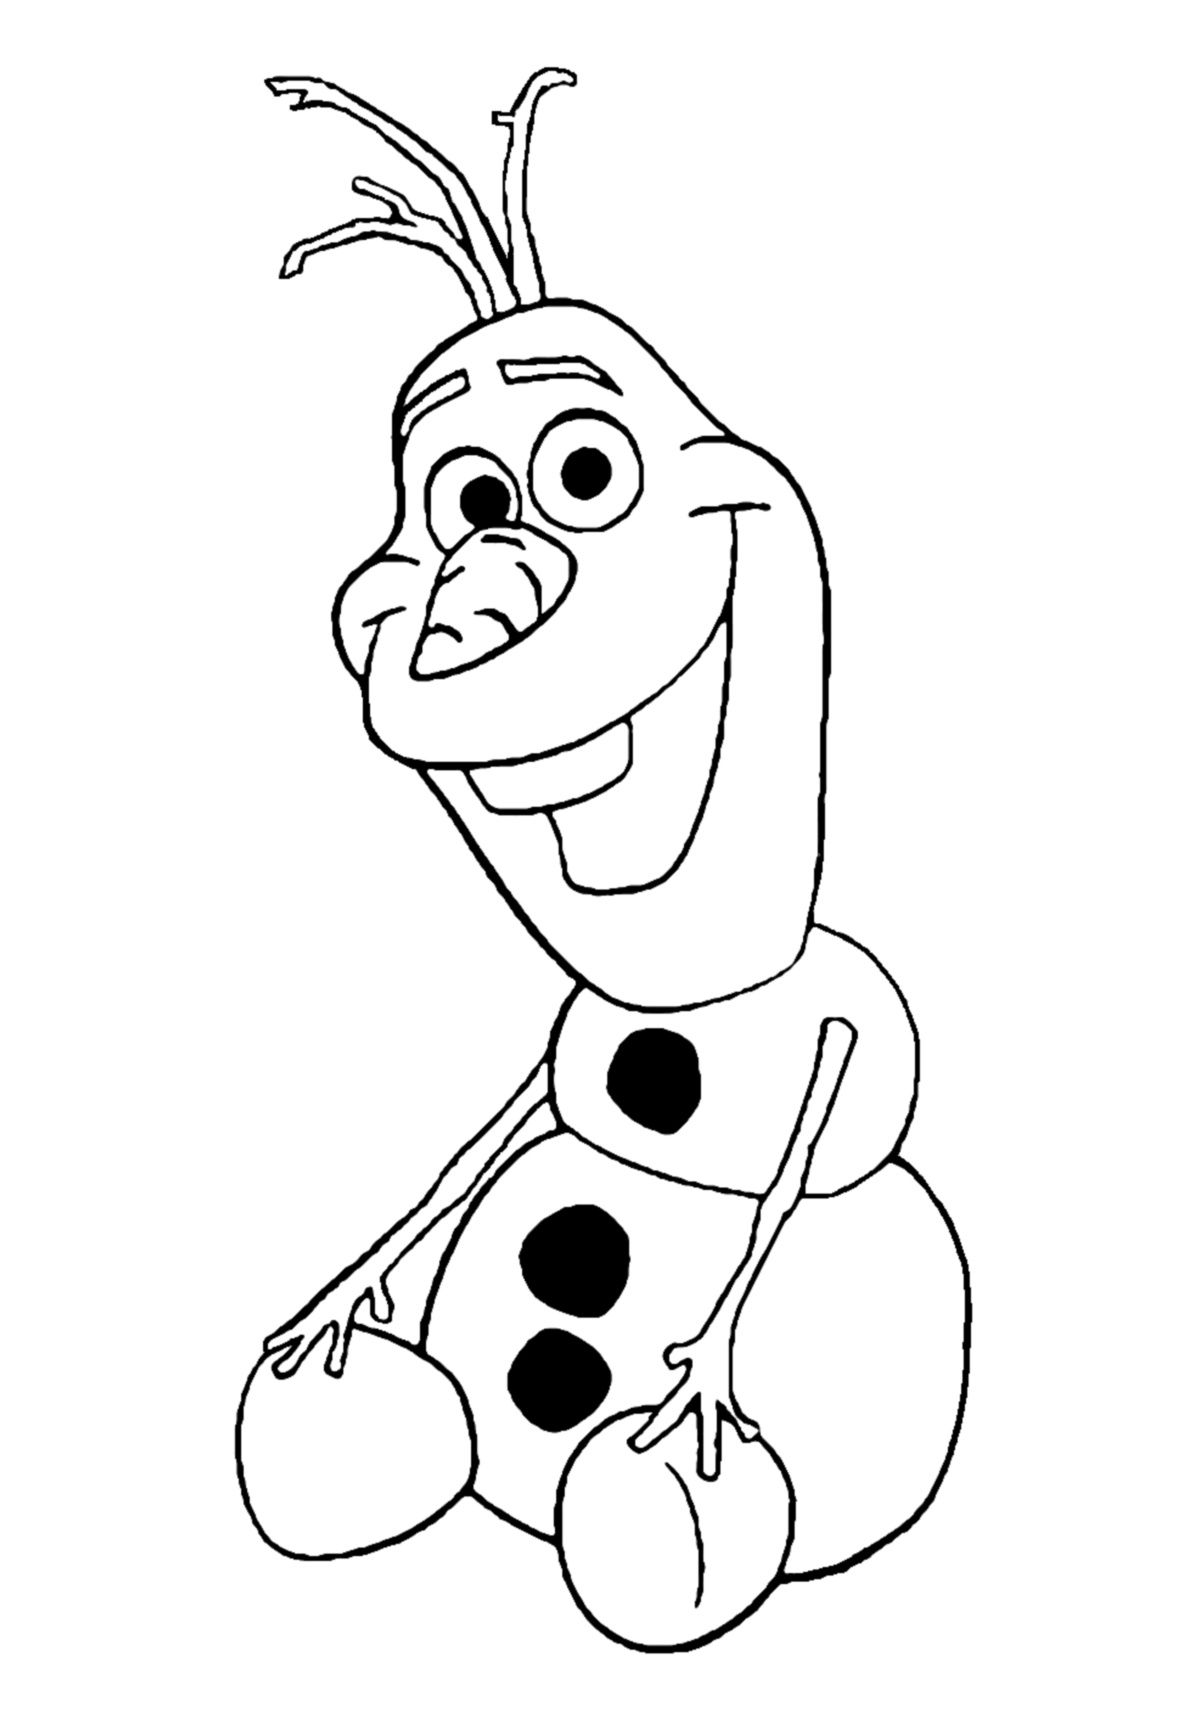 White,Line art,Cartoon,Head,Coloring book,Drawing,Illustration,Finger,Black-and-white,Fictional character,Art